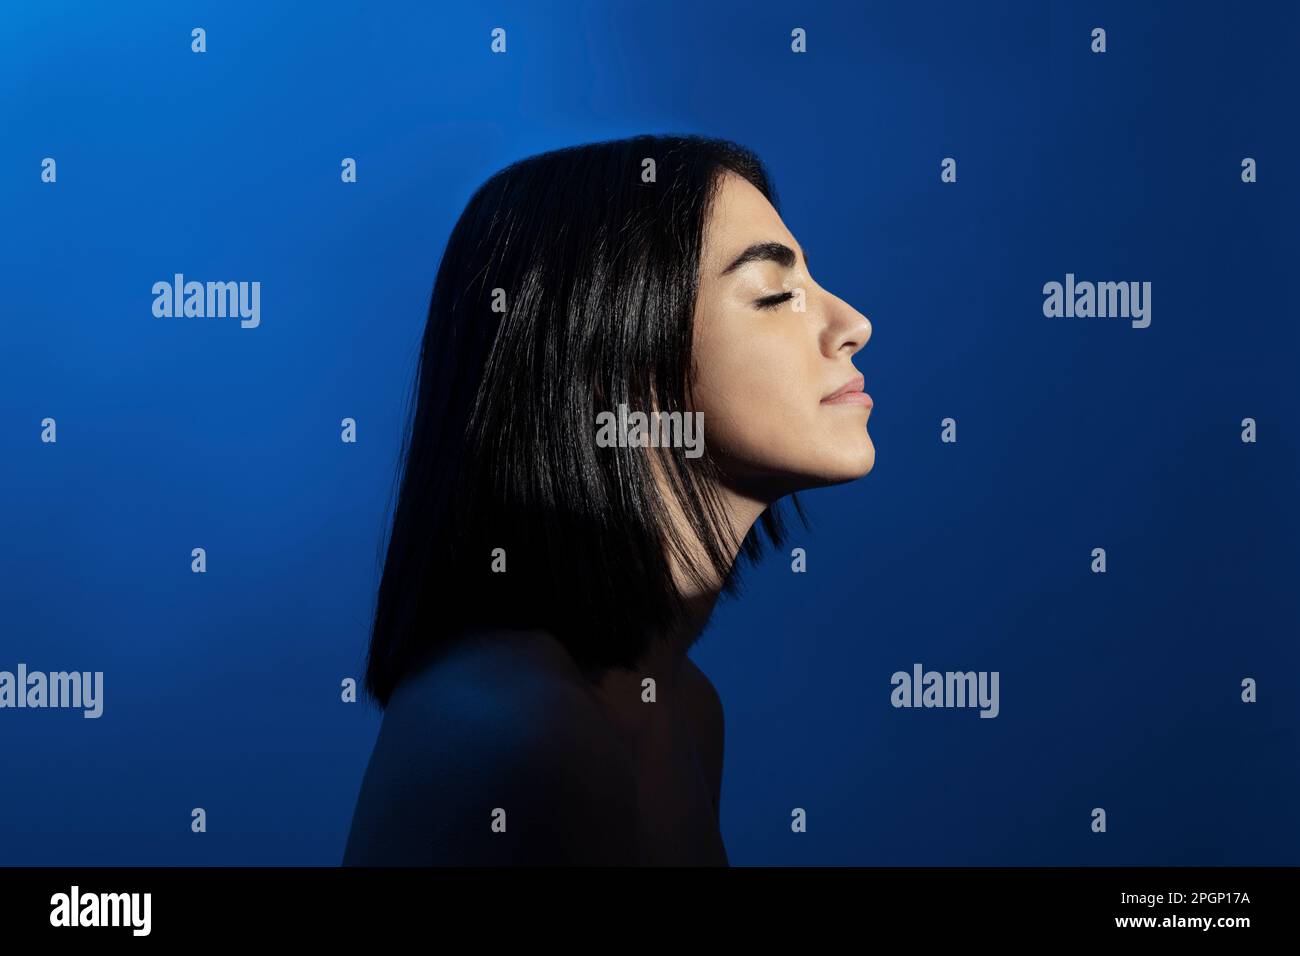 Young woman with eyes closed against blue background Stock Photo